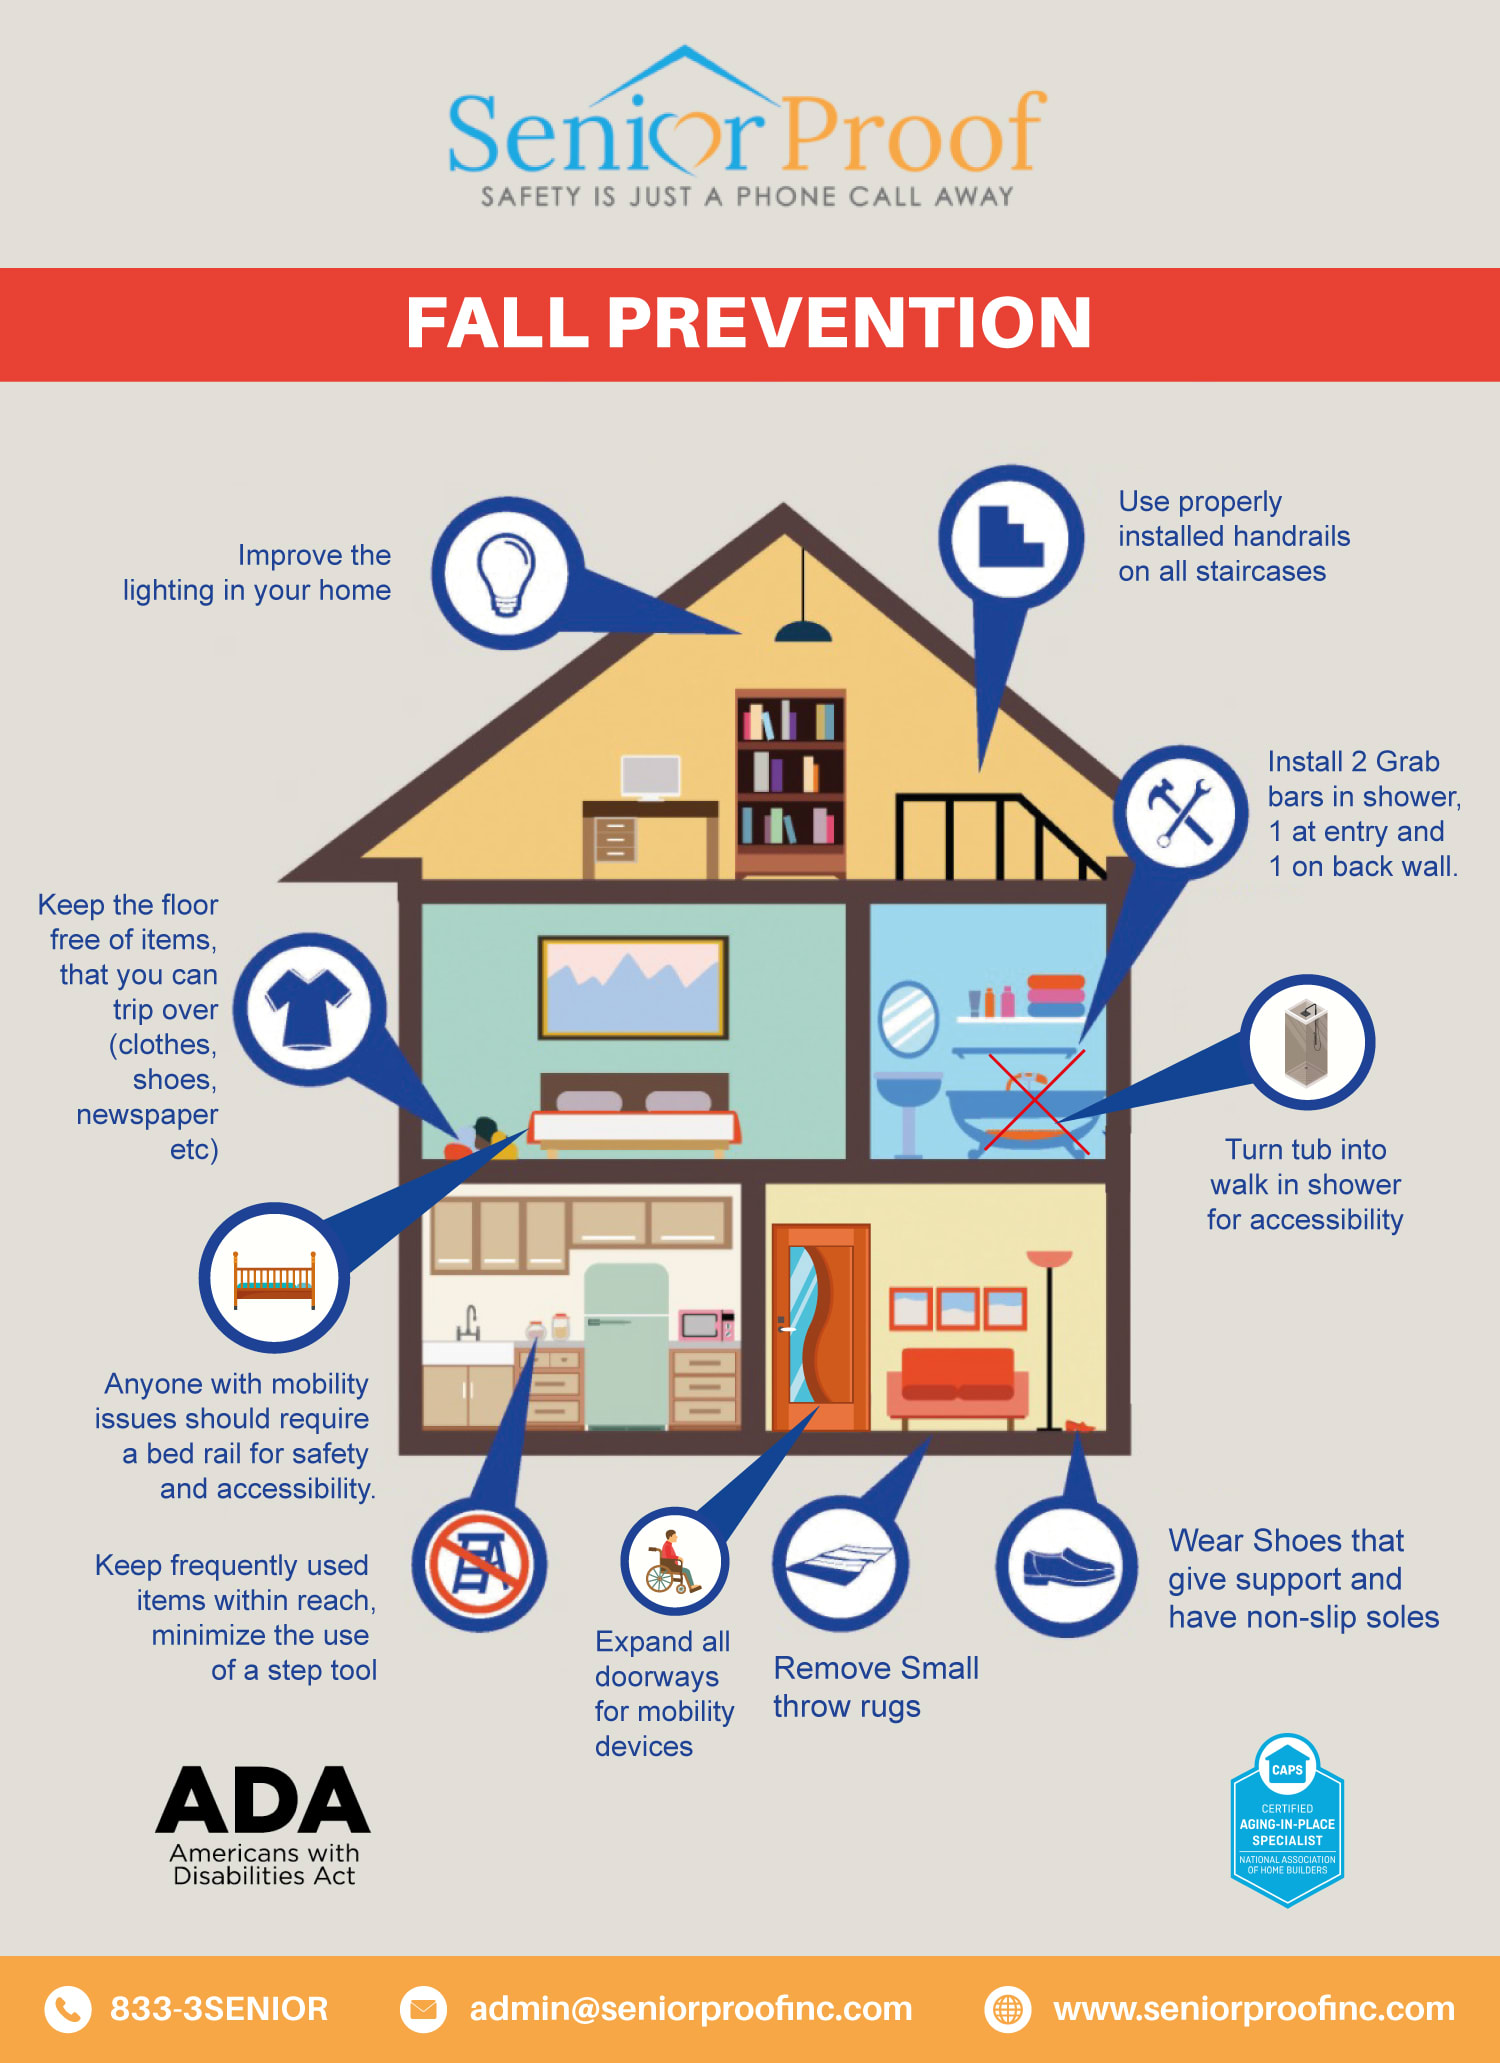 Fall Prevention Tips at Home